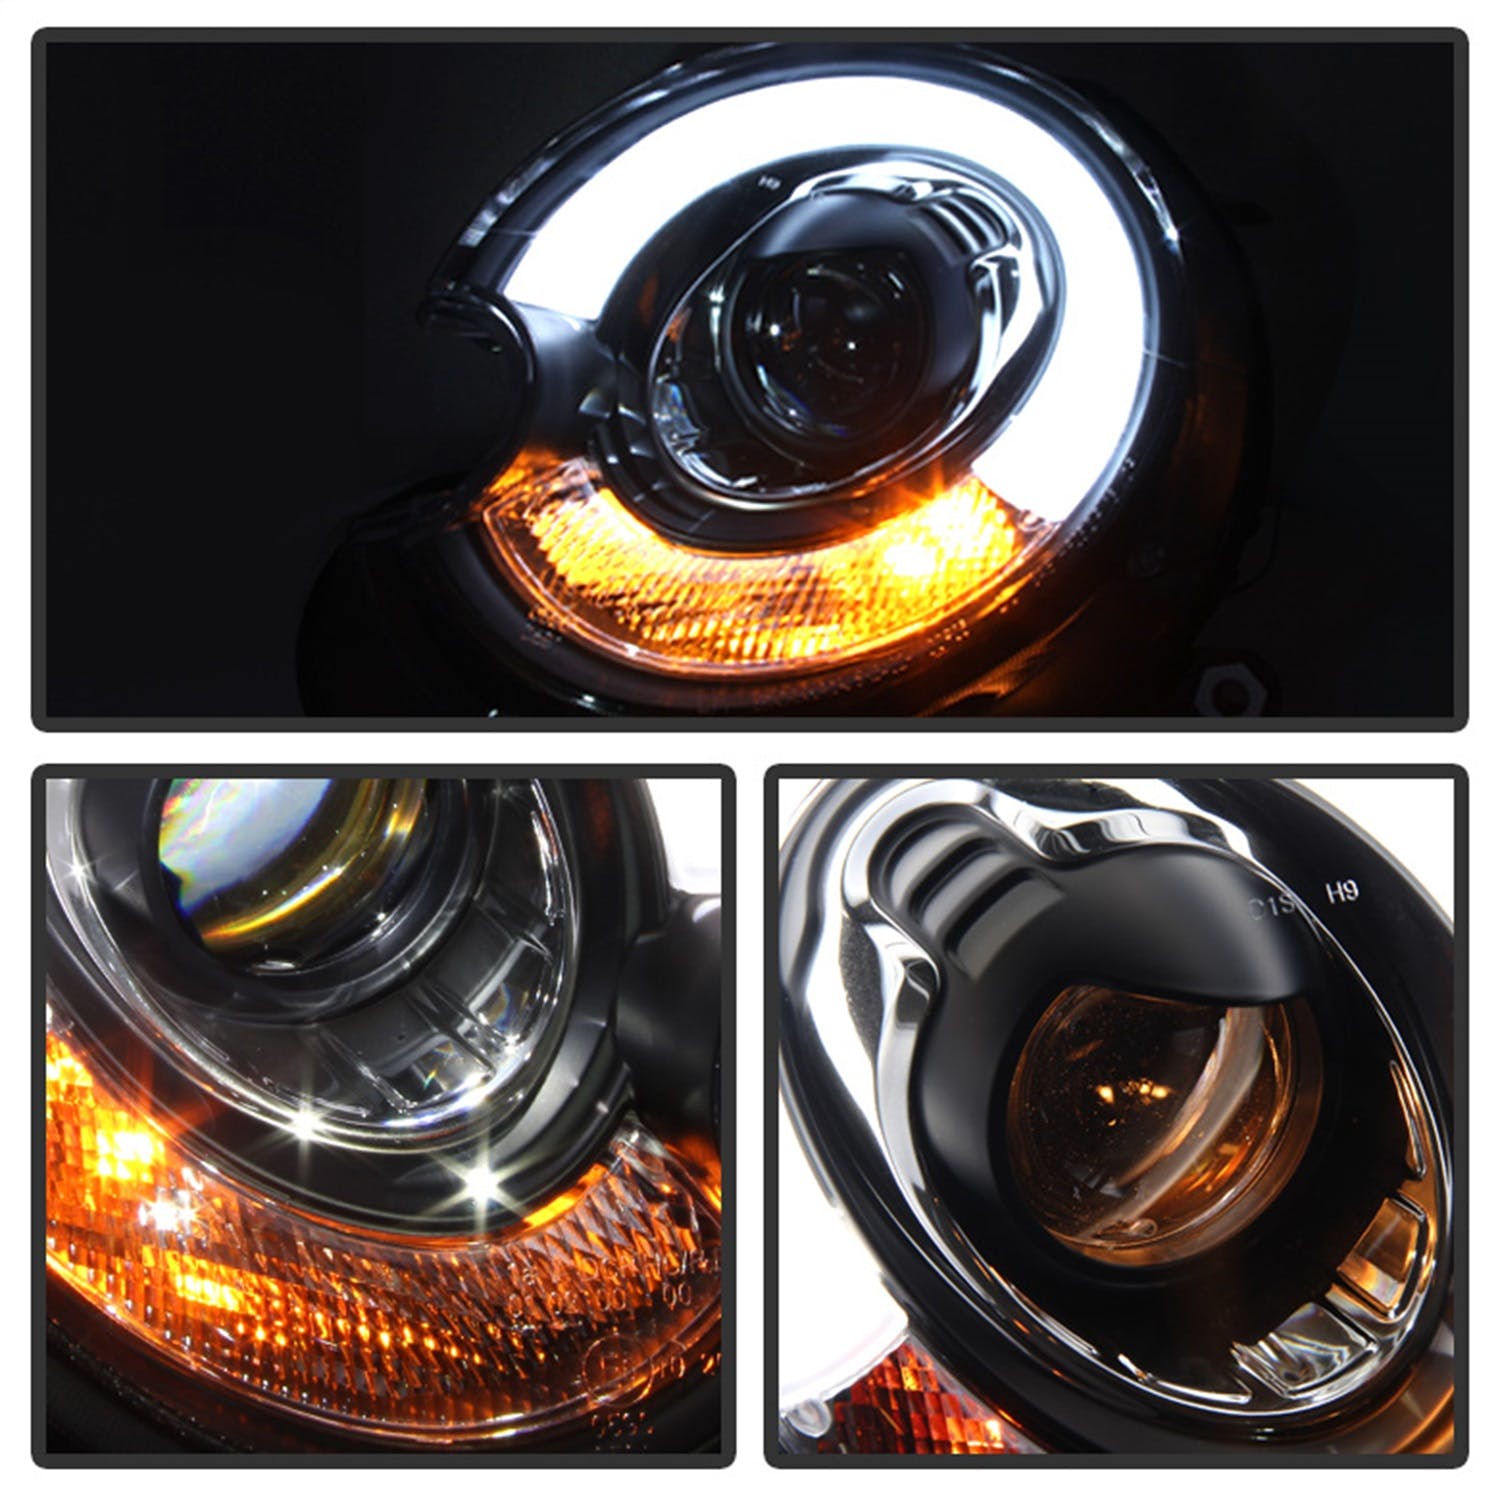 Spyder Auto 5080615 (Spyder) Mini Cooper 2010-2012 Projector Headlights-Xenon/HID Model Only ( Not C